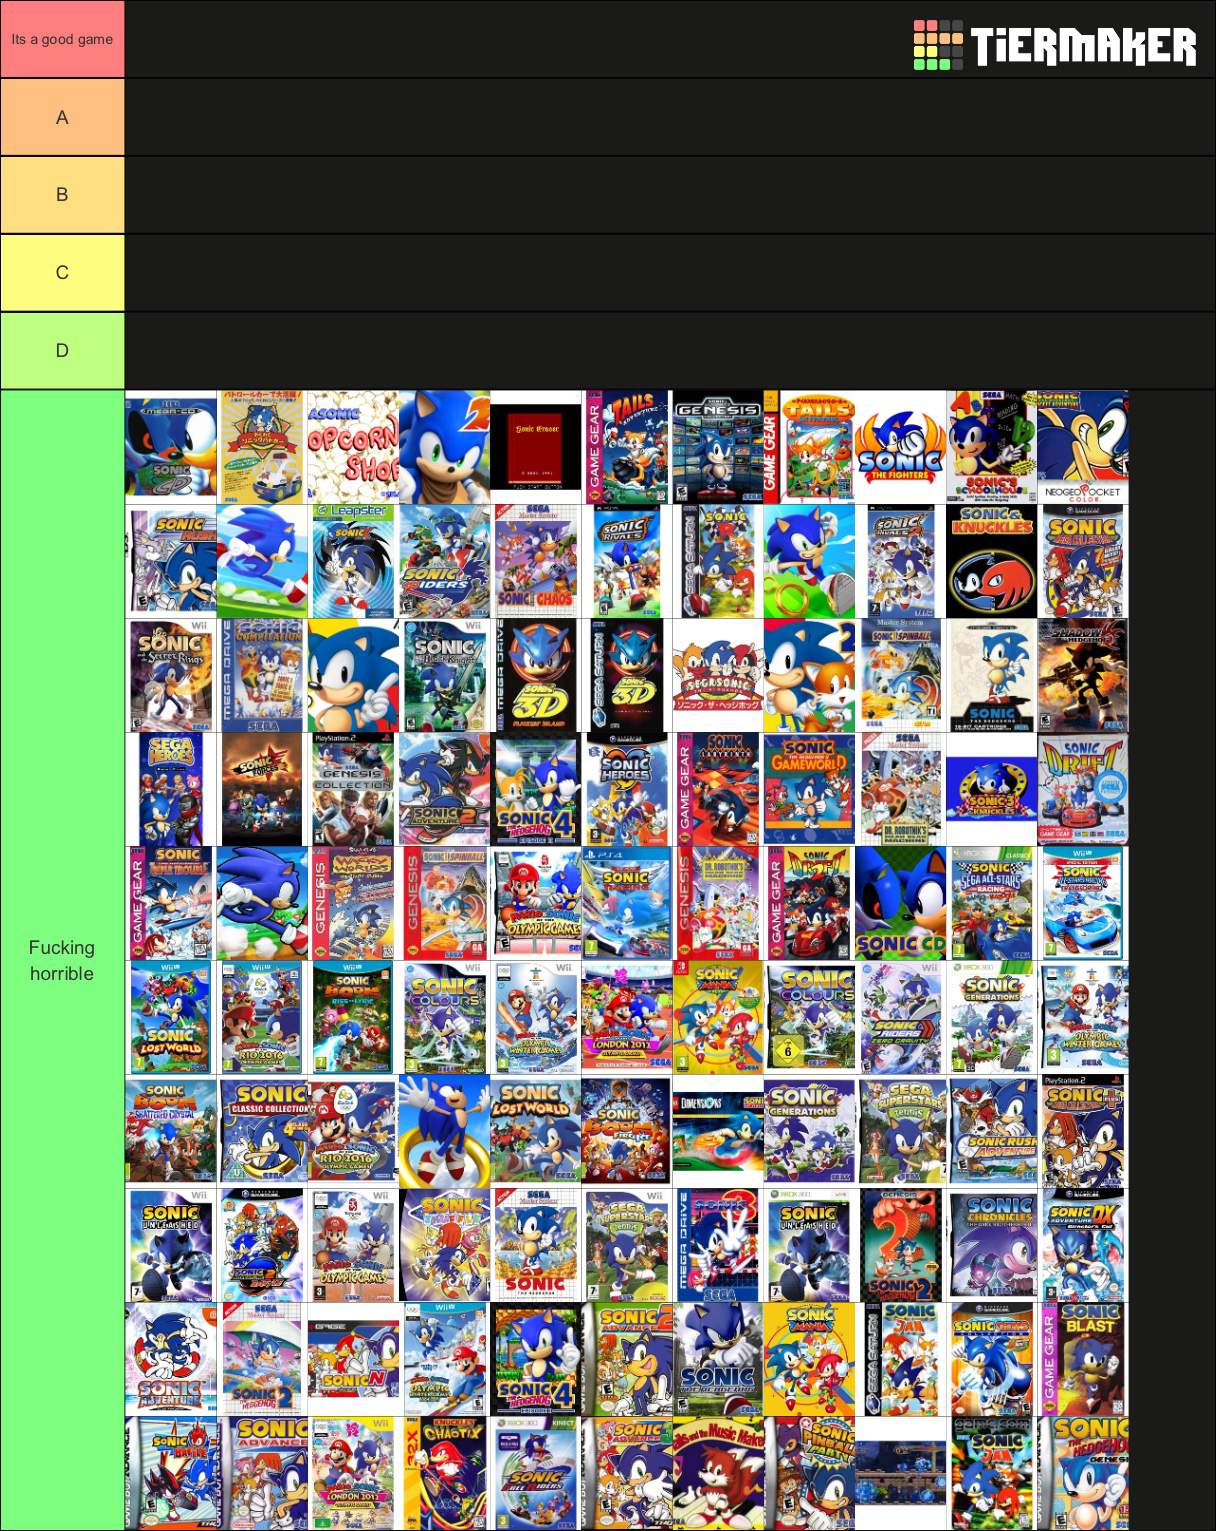 Every Sonic Games Ranked In A Tierlist Sonic the Hedgehog! Amino